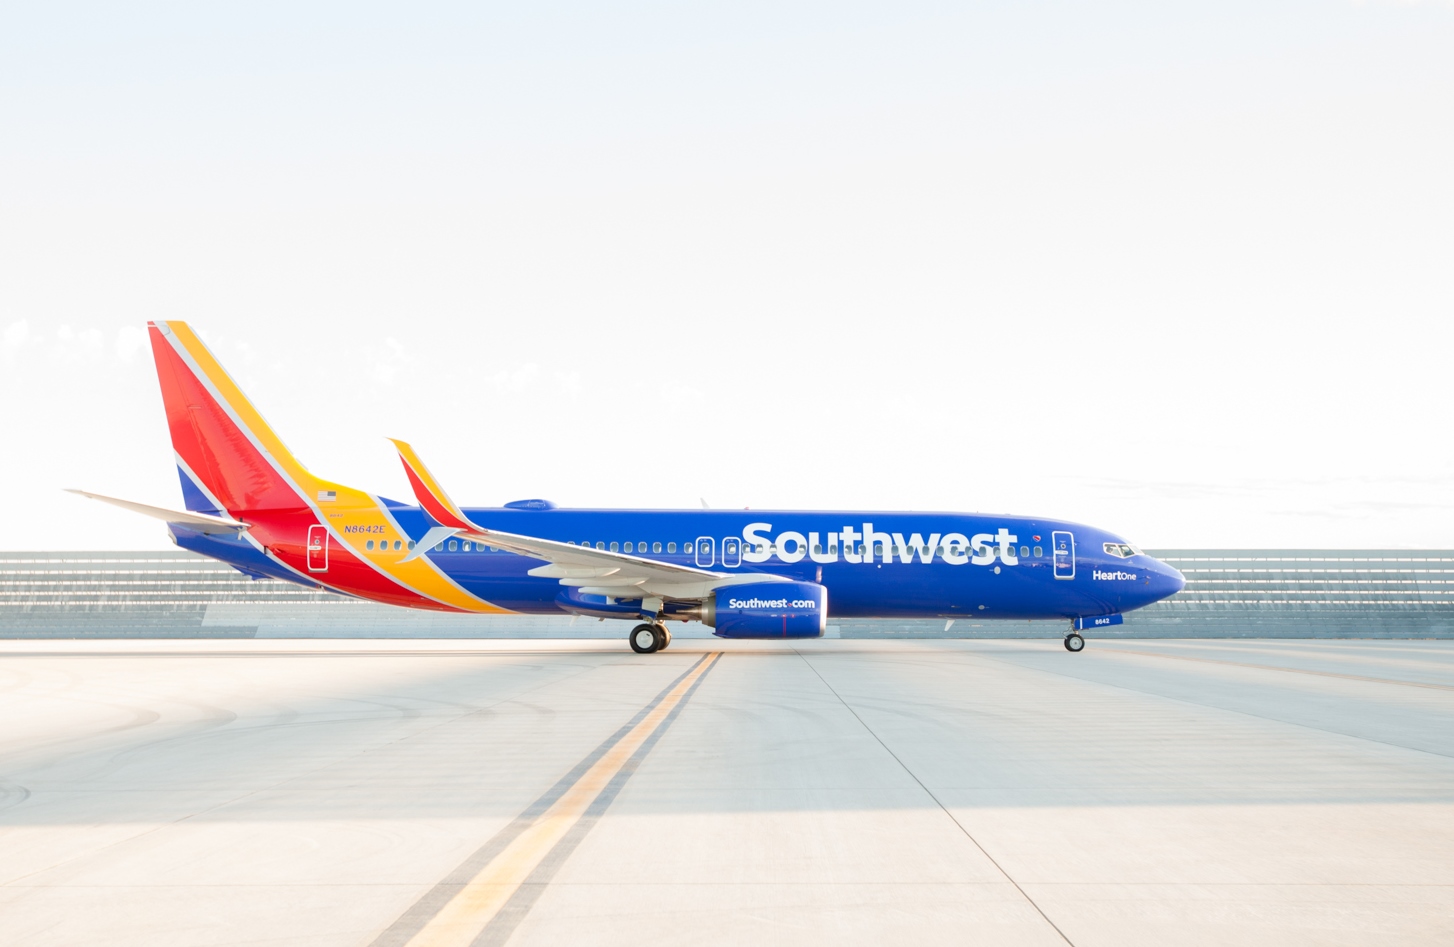 Southwest Heart: Painting the Plane